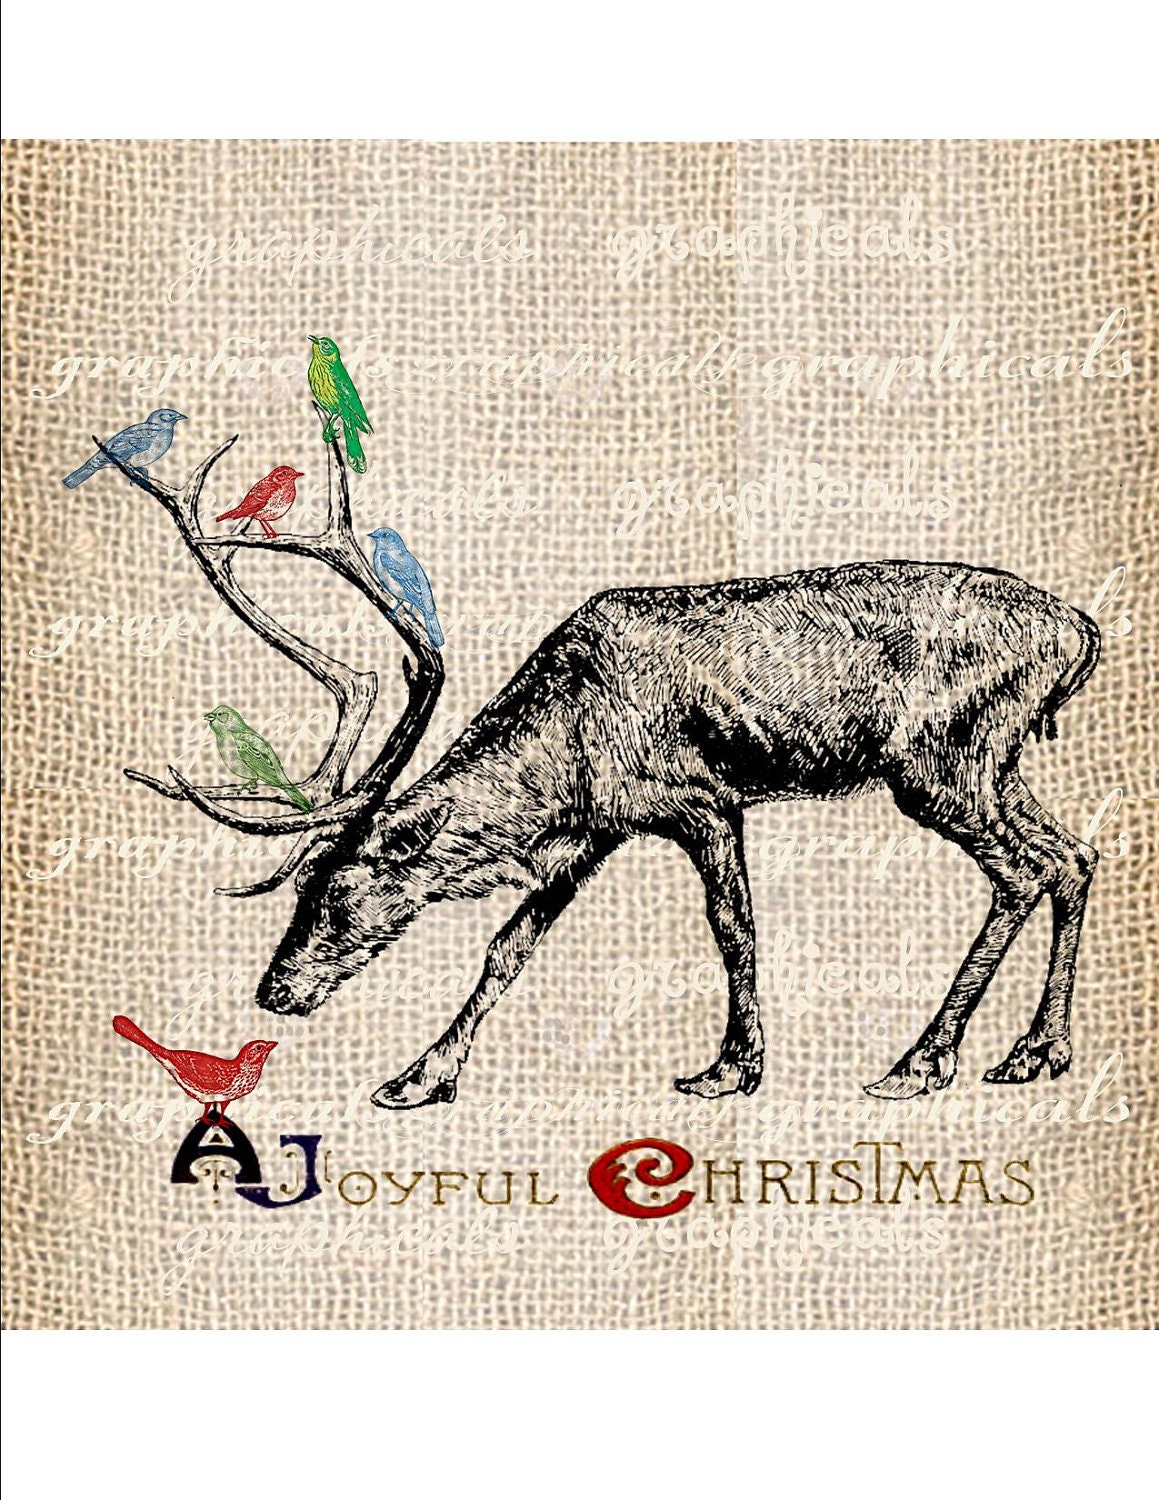 Christmas digital download image Vintage reindeer birds antlers transfer to fabric or papercraft tote bags pillows cards and more